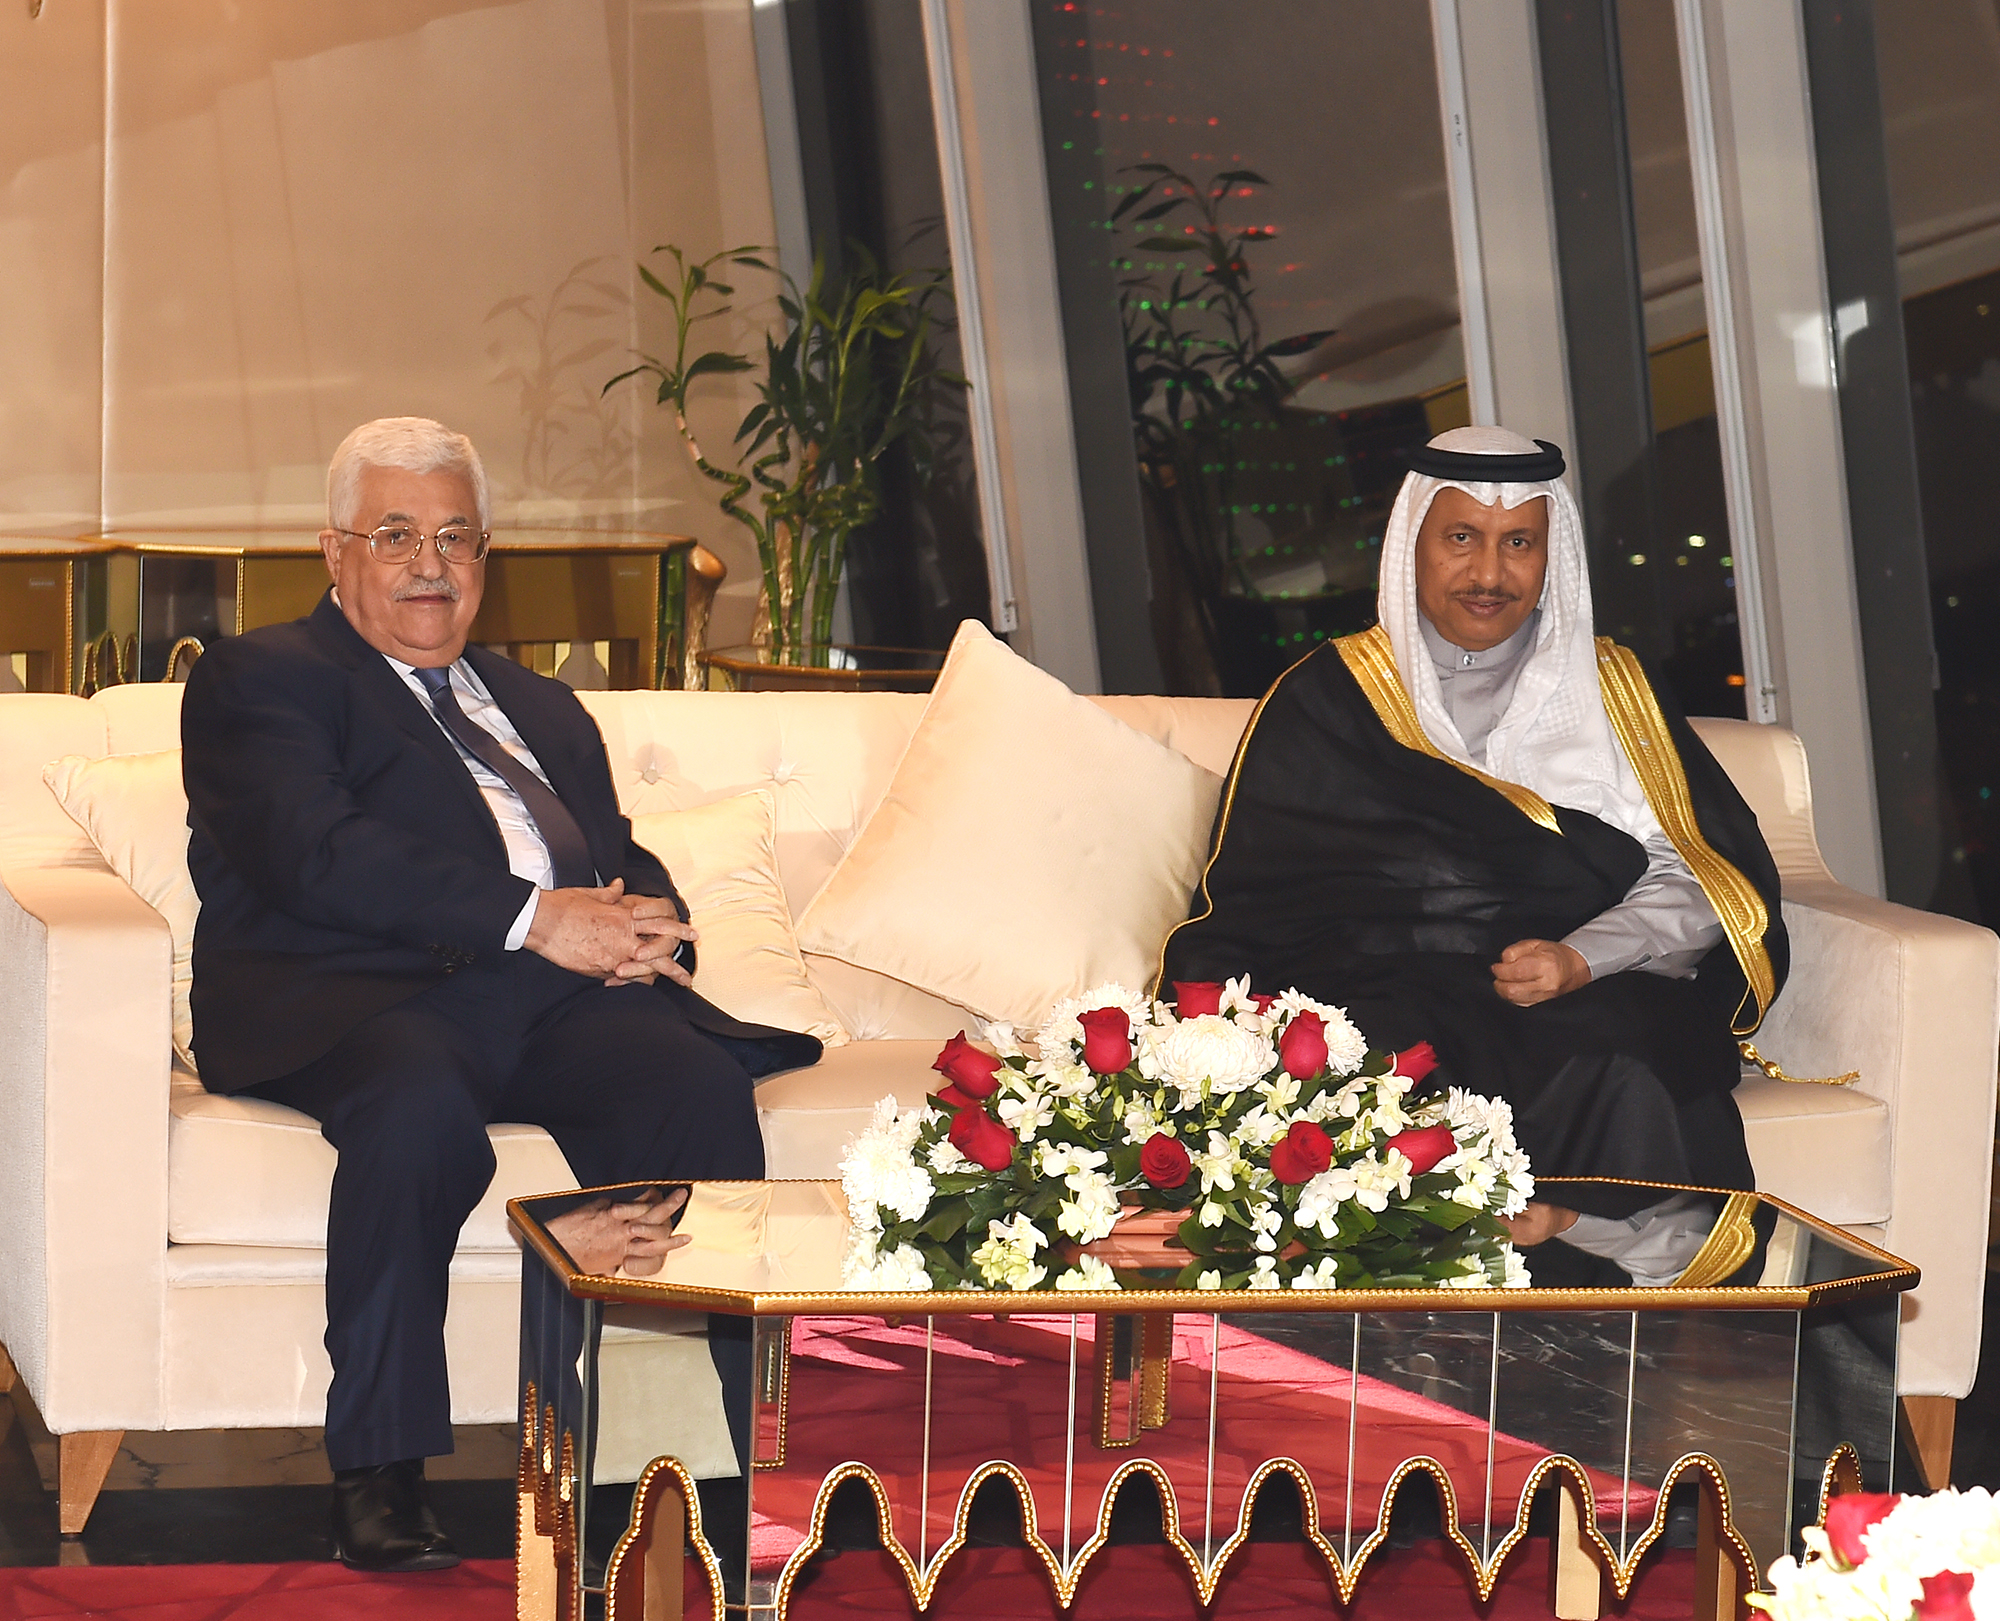 His Highness the Prime Minister Sheikh Jaber Al-Mubarak Al-Hamad Al-Sabah holds dinner banquet in honor of visiting Palestinian President Mahmoud Abbas